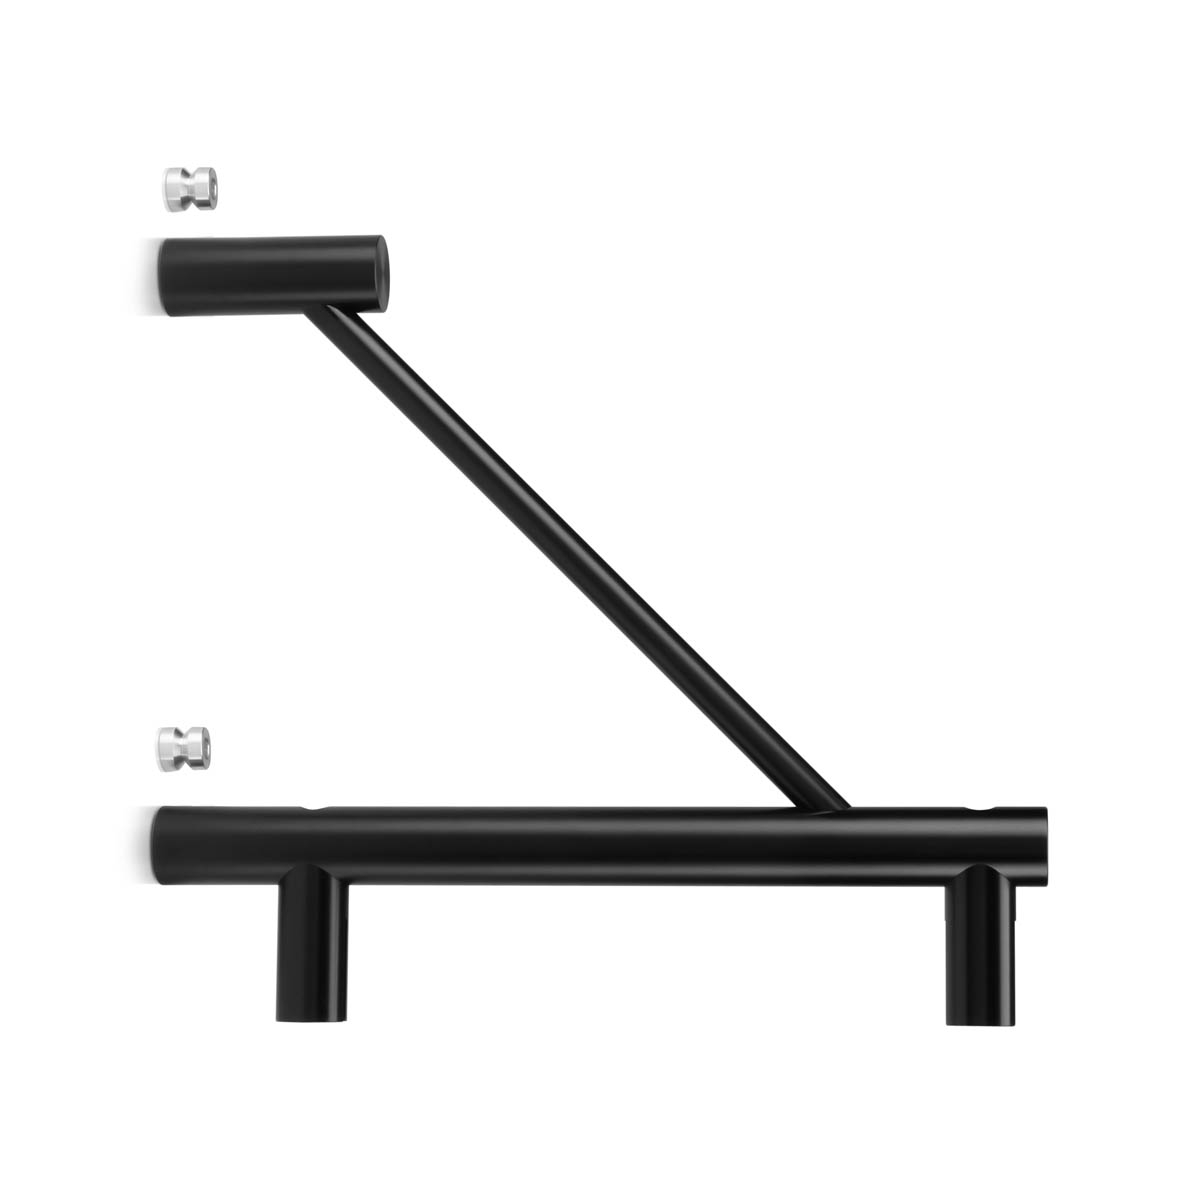 Aluminum Flag Sign Bracket Only, Matte Black Anodized Finish. 1/8'' Thickness Material Accepted, 7-7/8 Length, 3/4'' Diameter. (Sold Without Panel, Bracket Only)